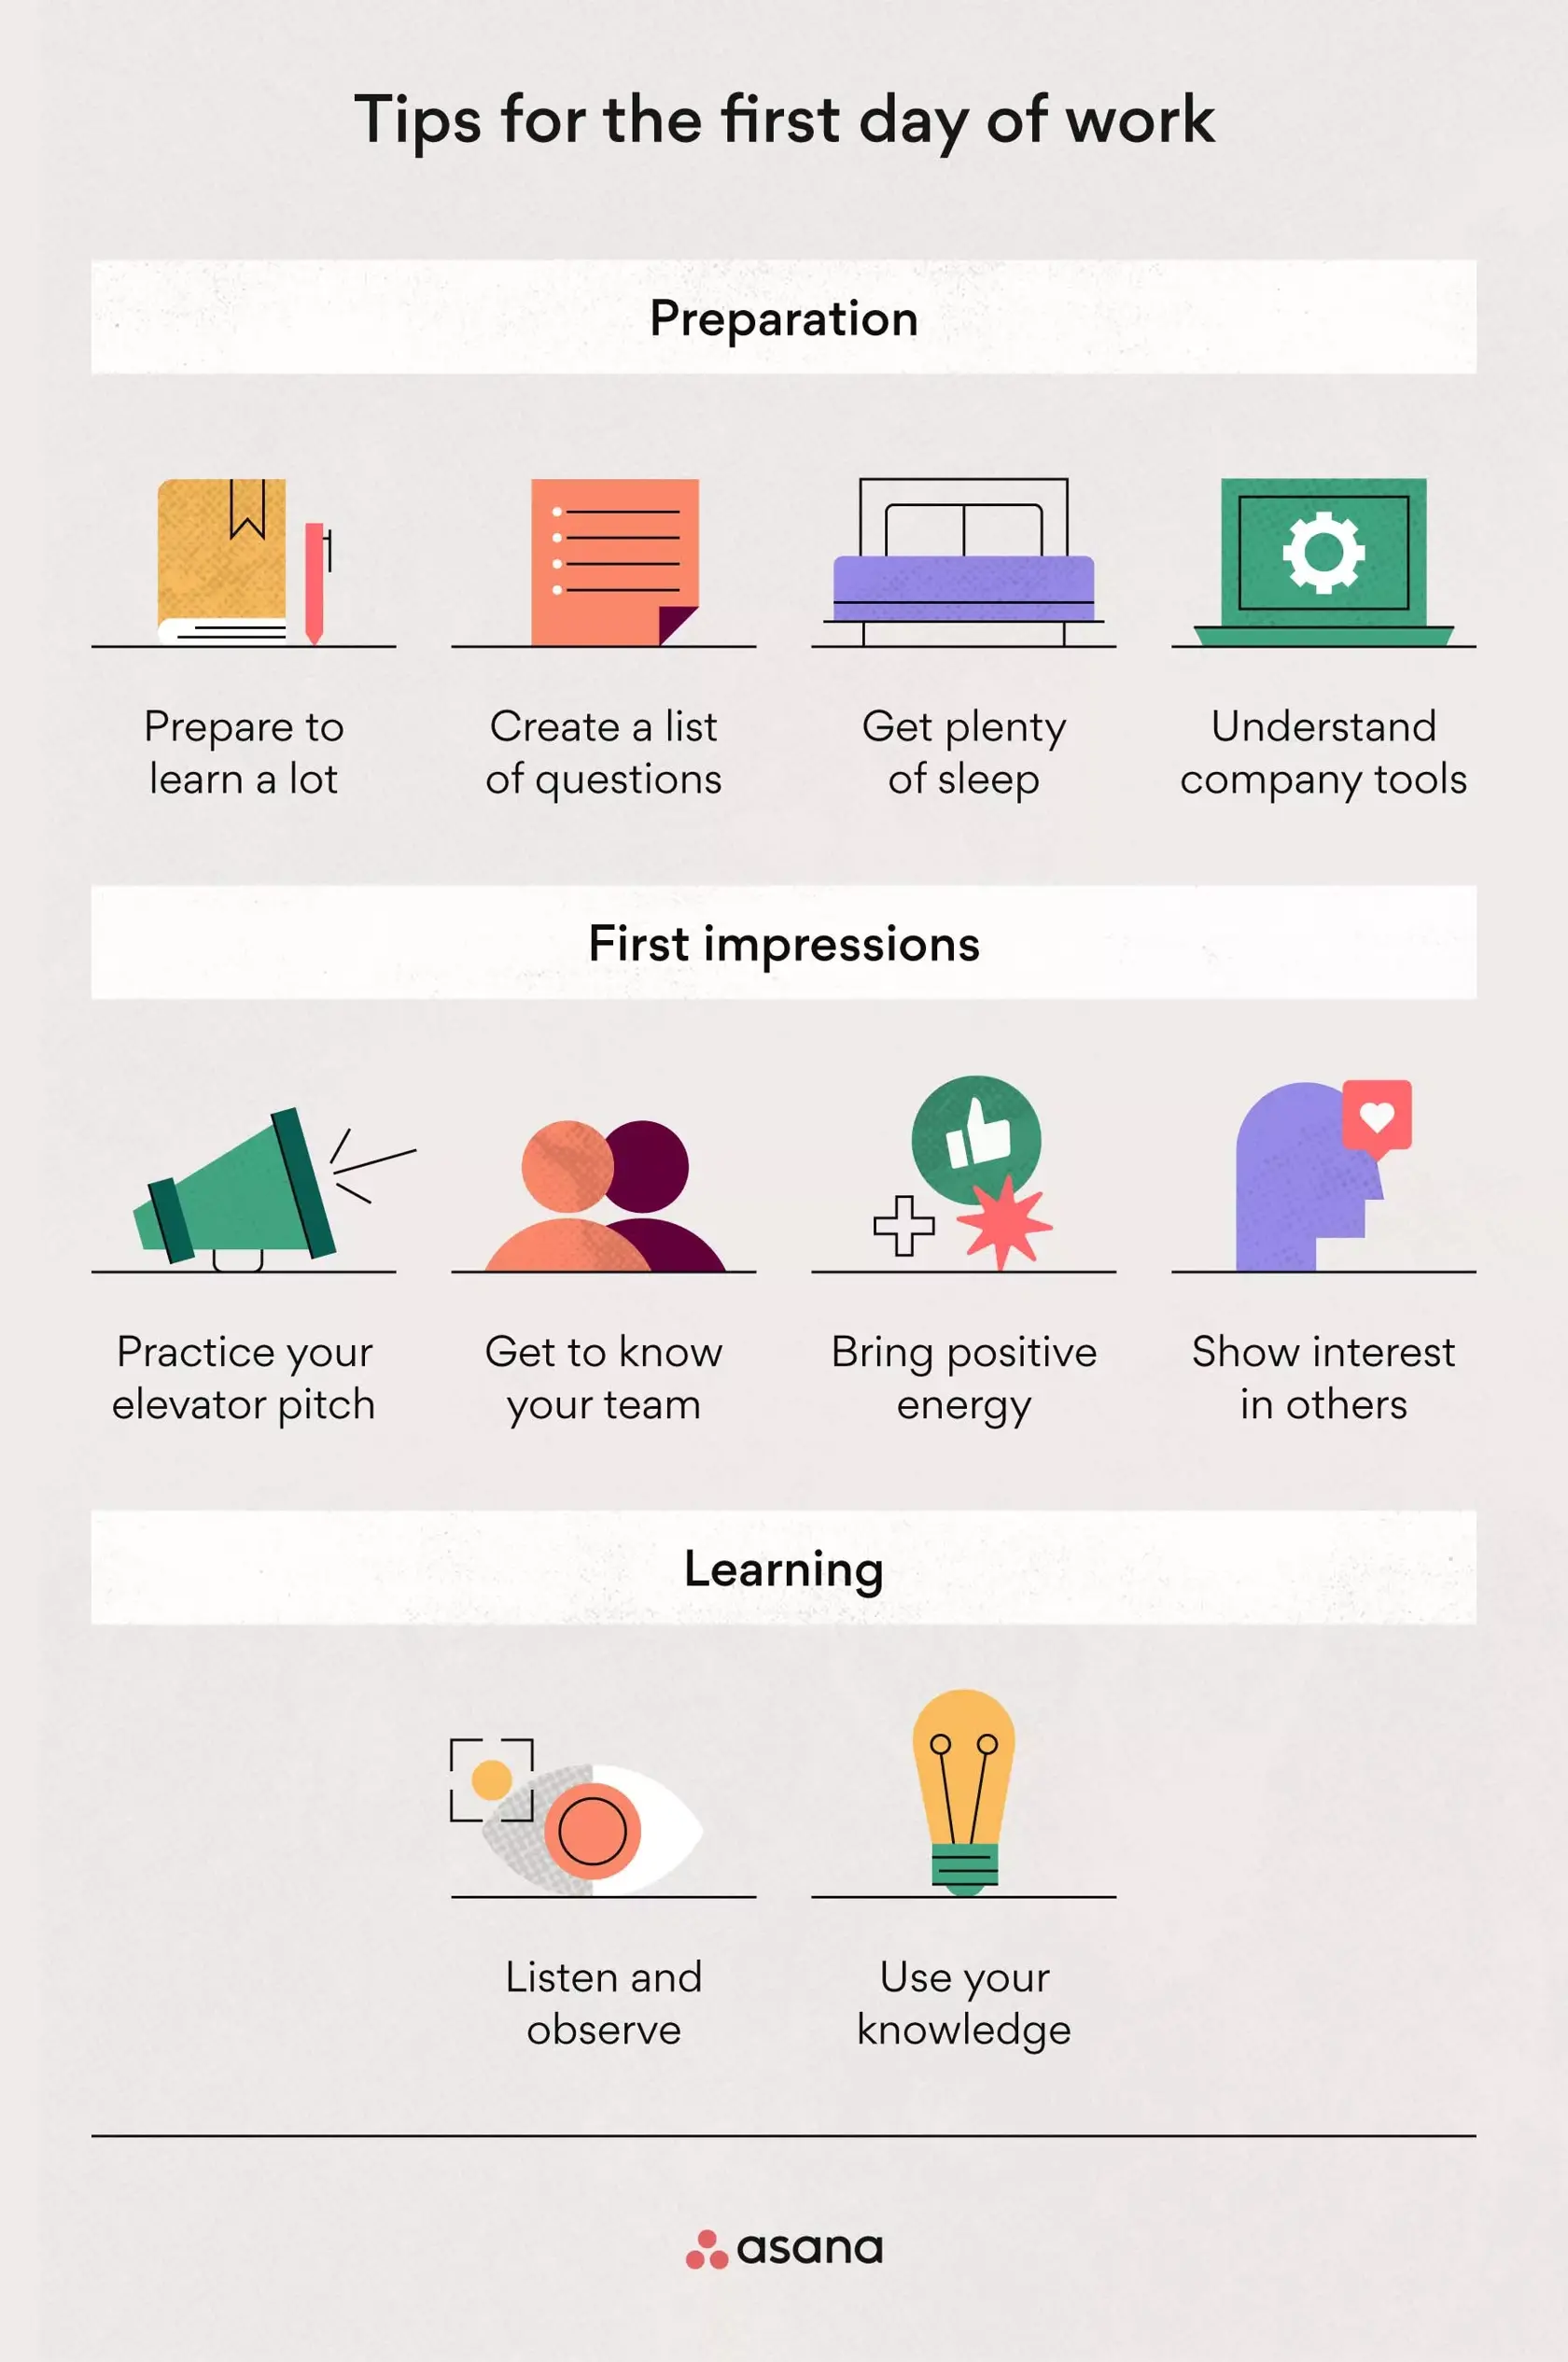 Tips for your first day of work